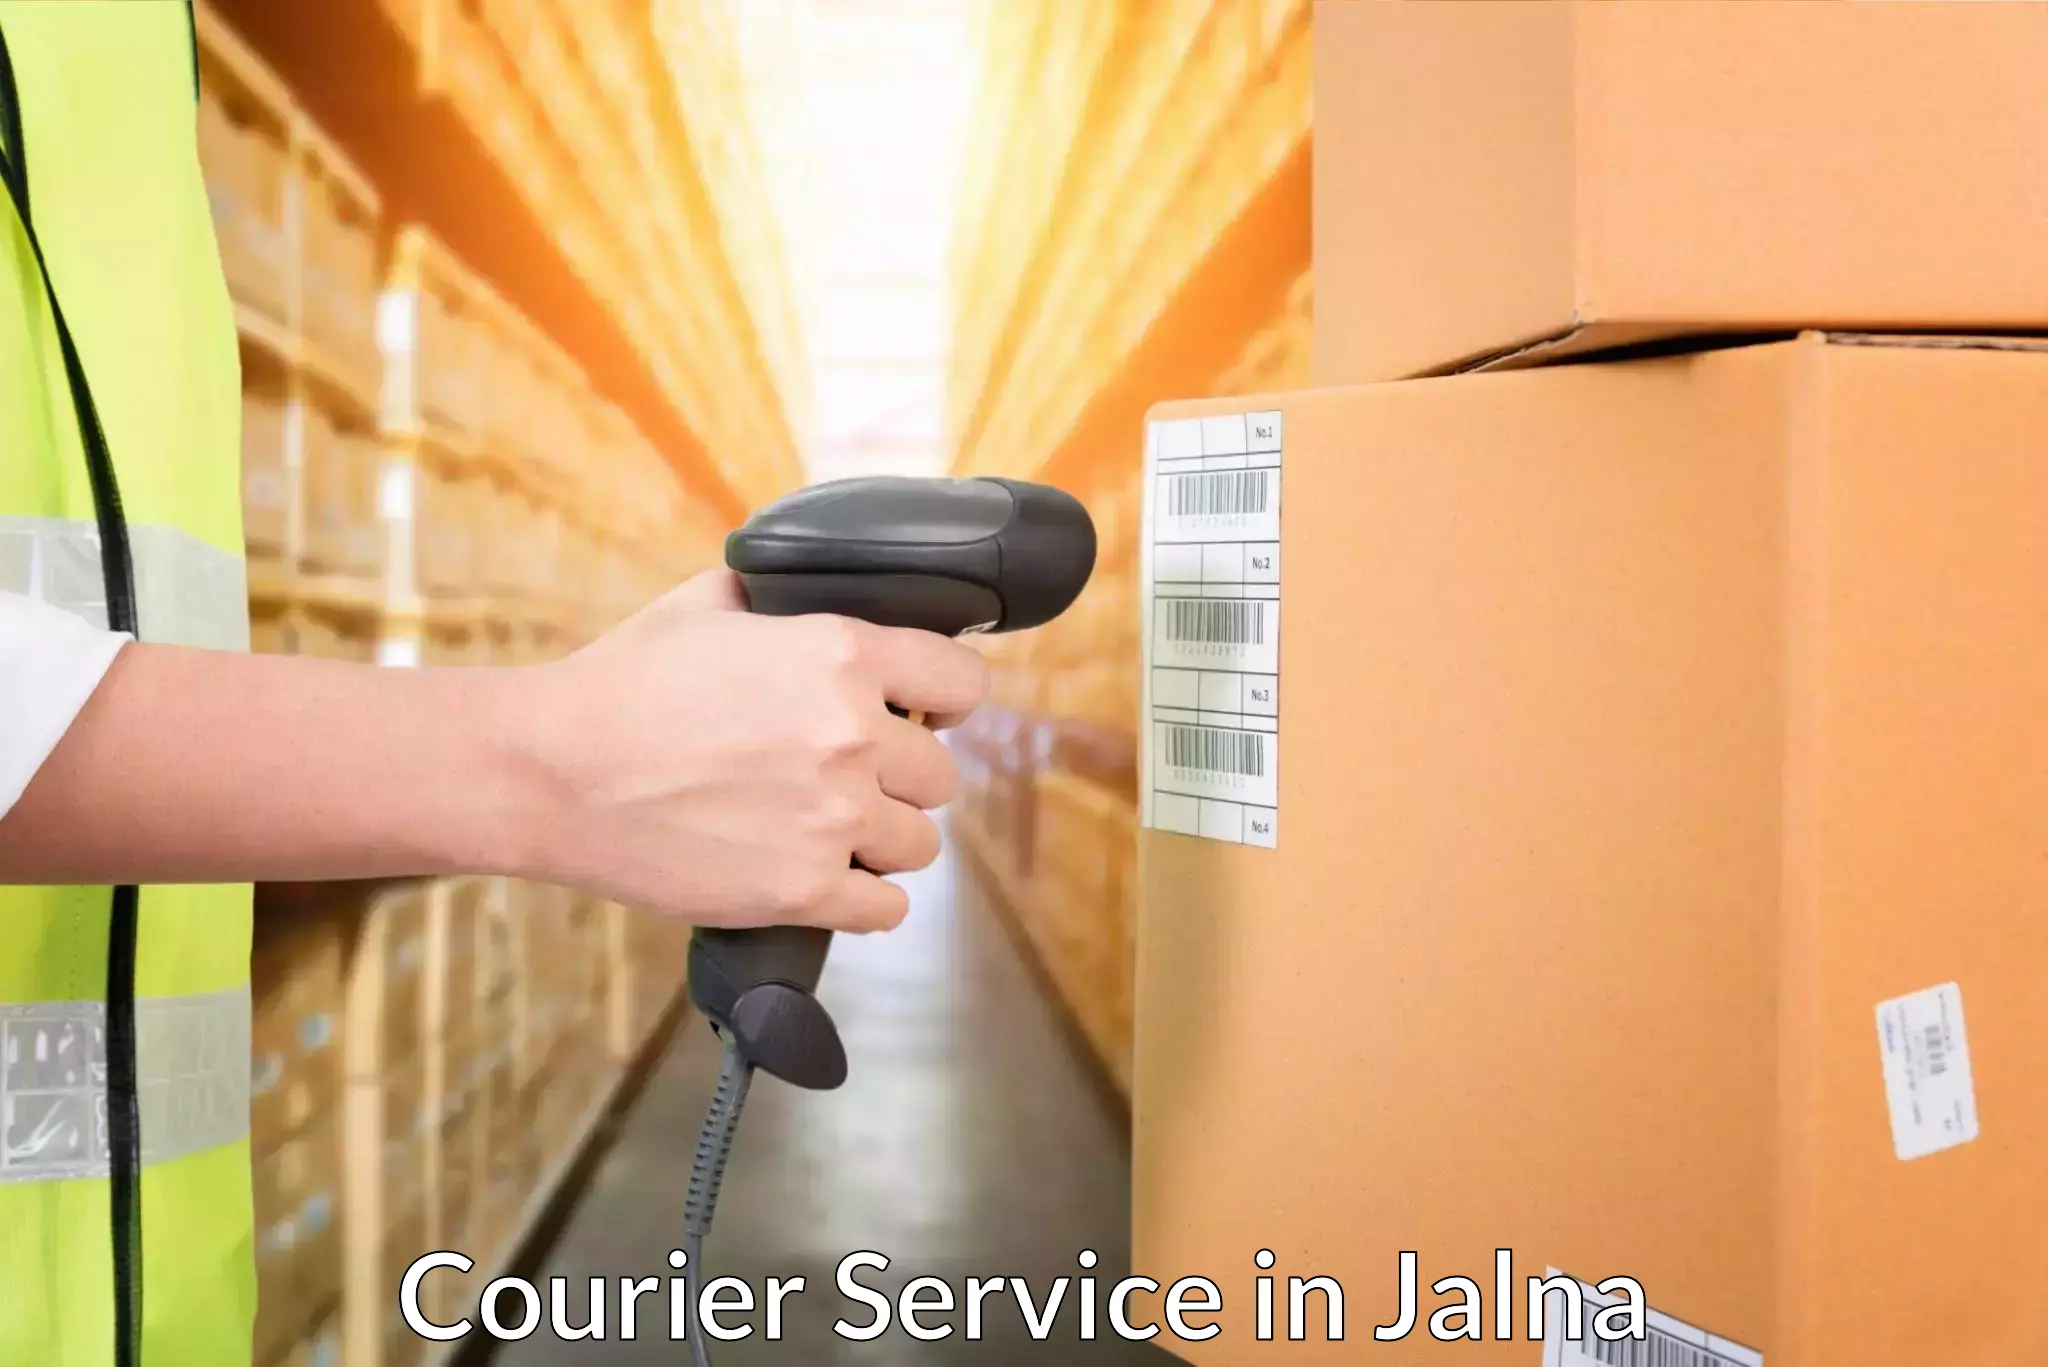 Supply chain delivery in Jalna